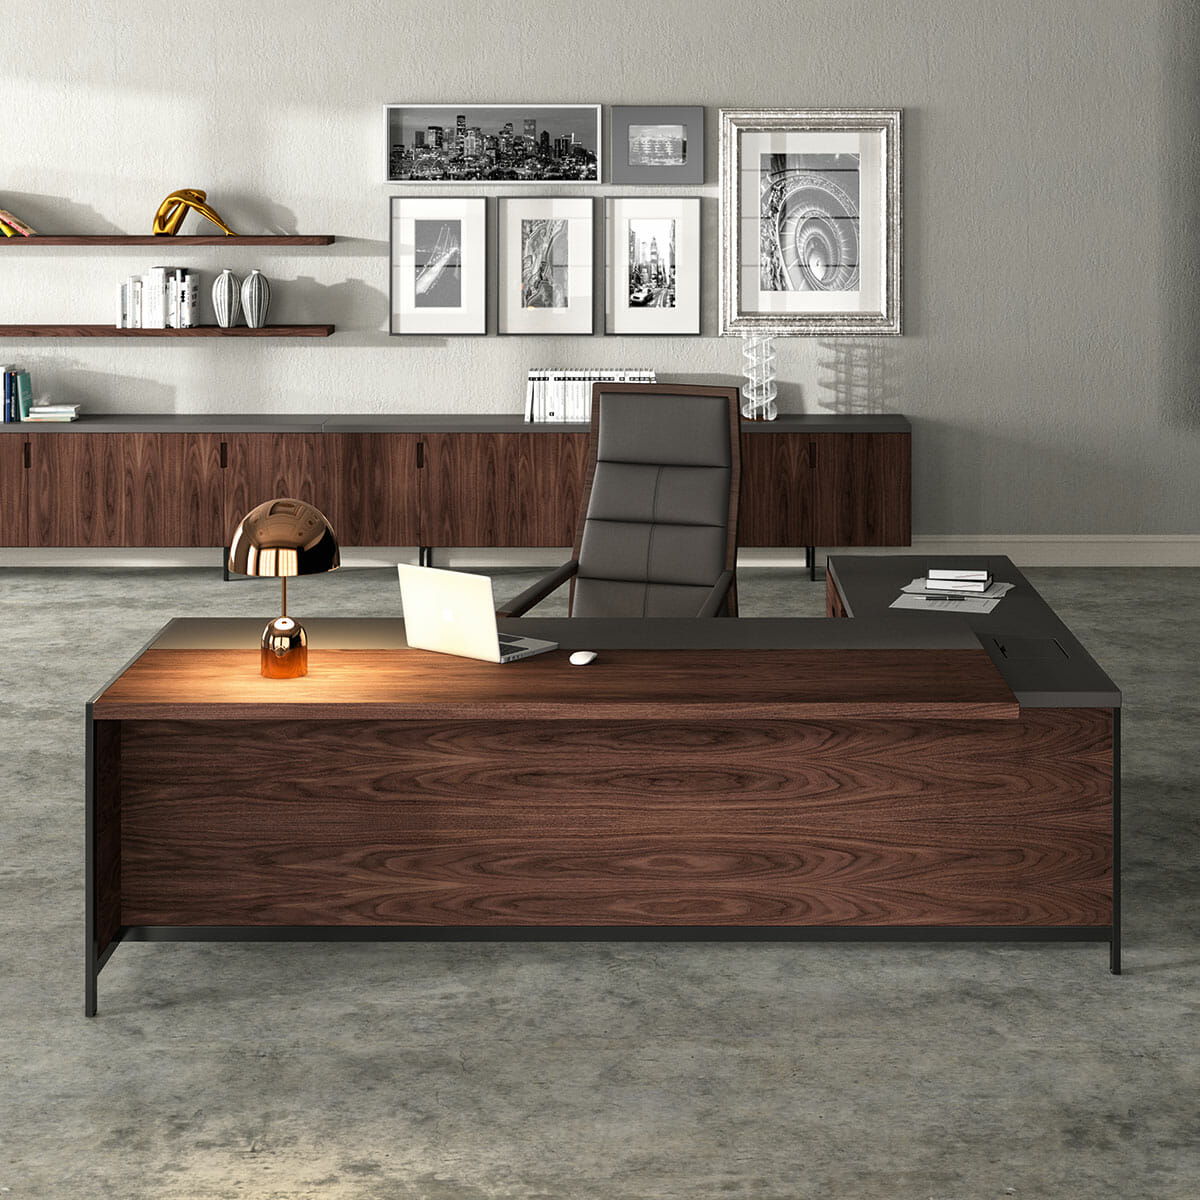 ofifran-gallery-executive-workplaces